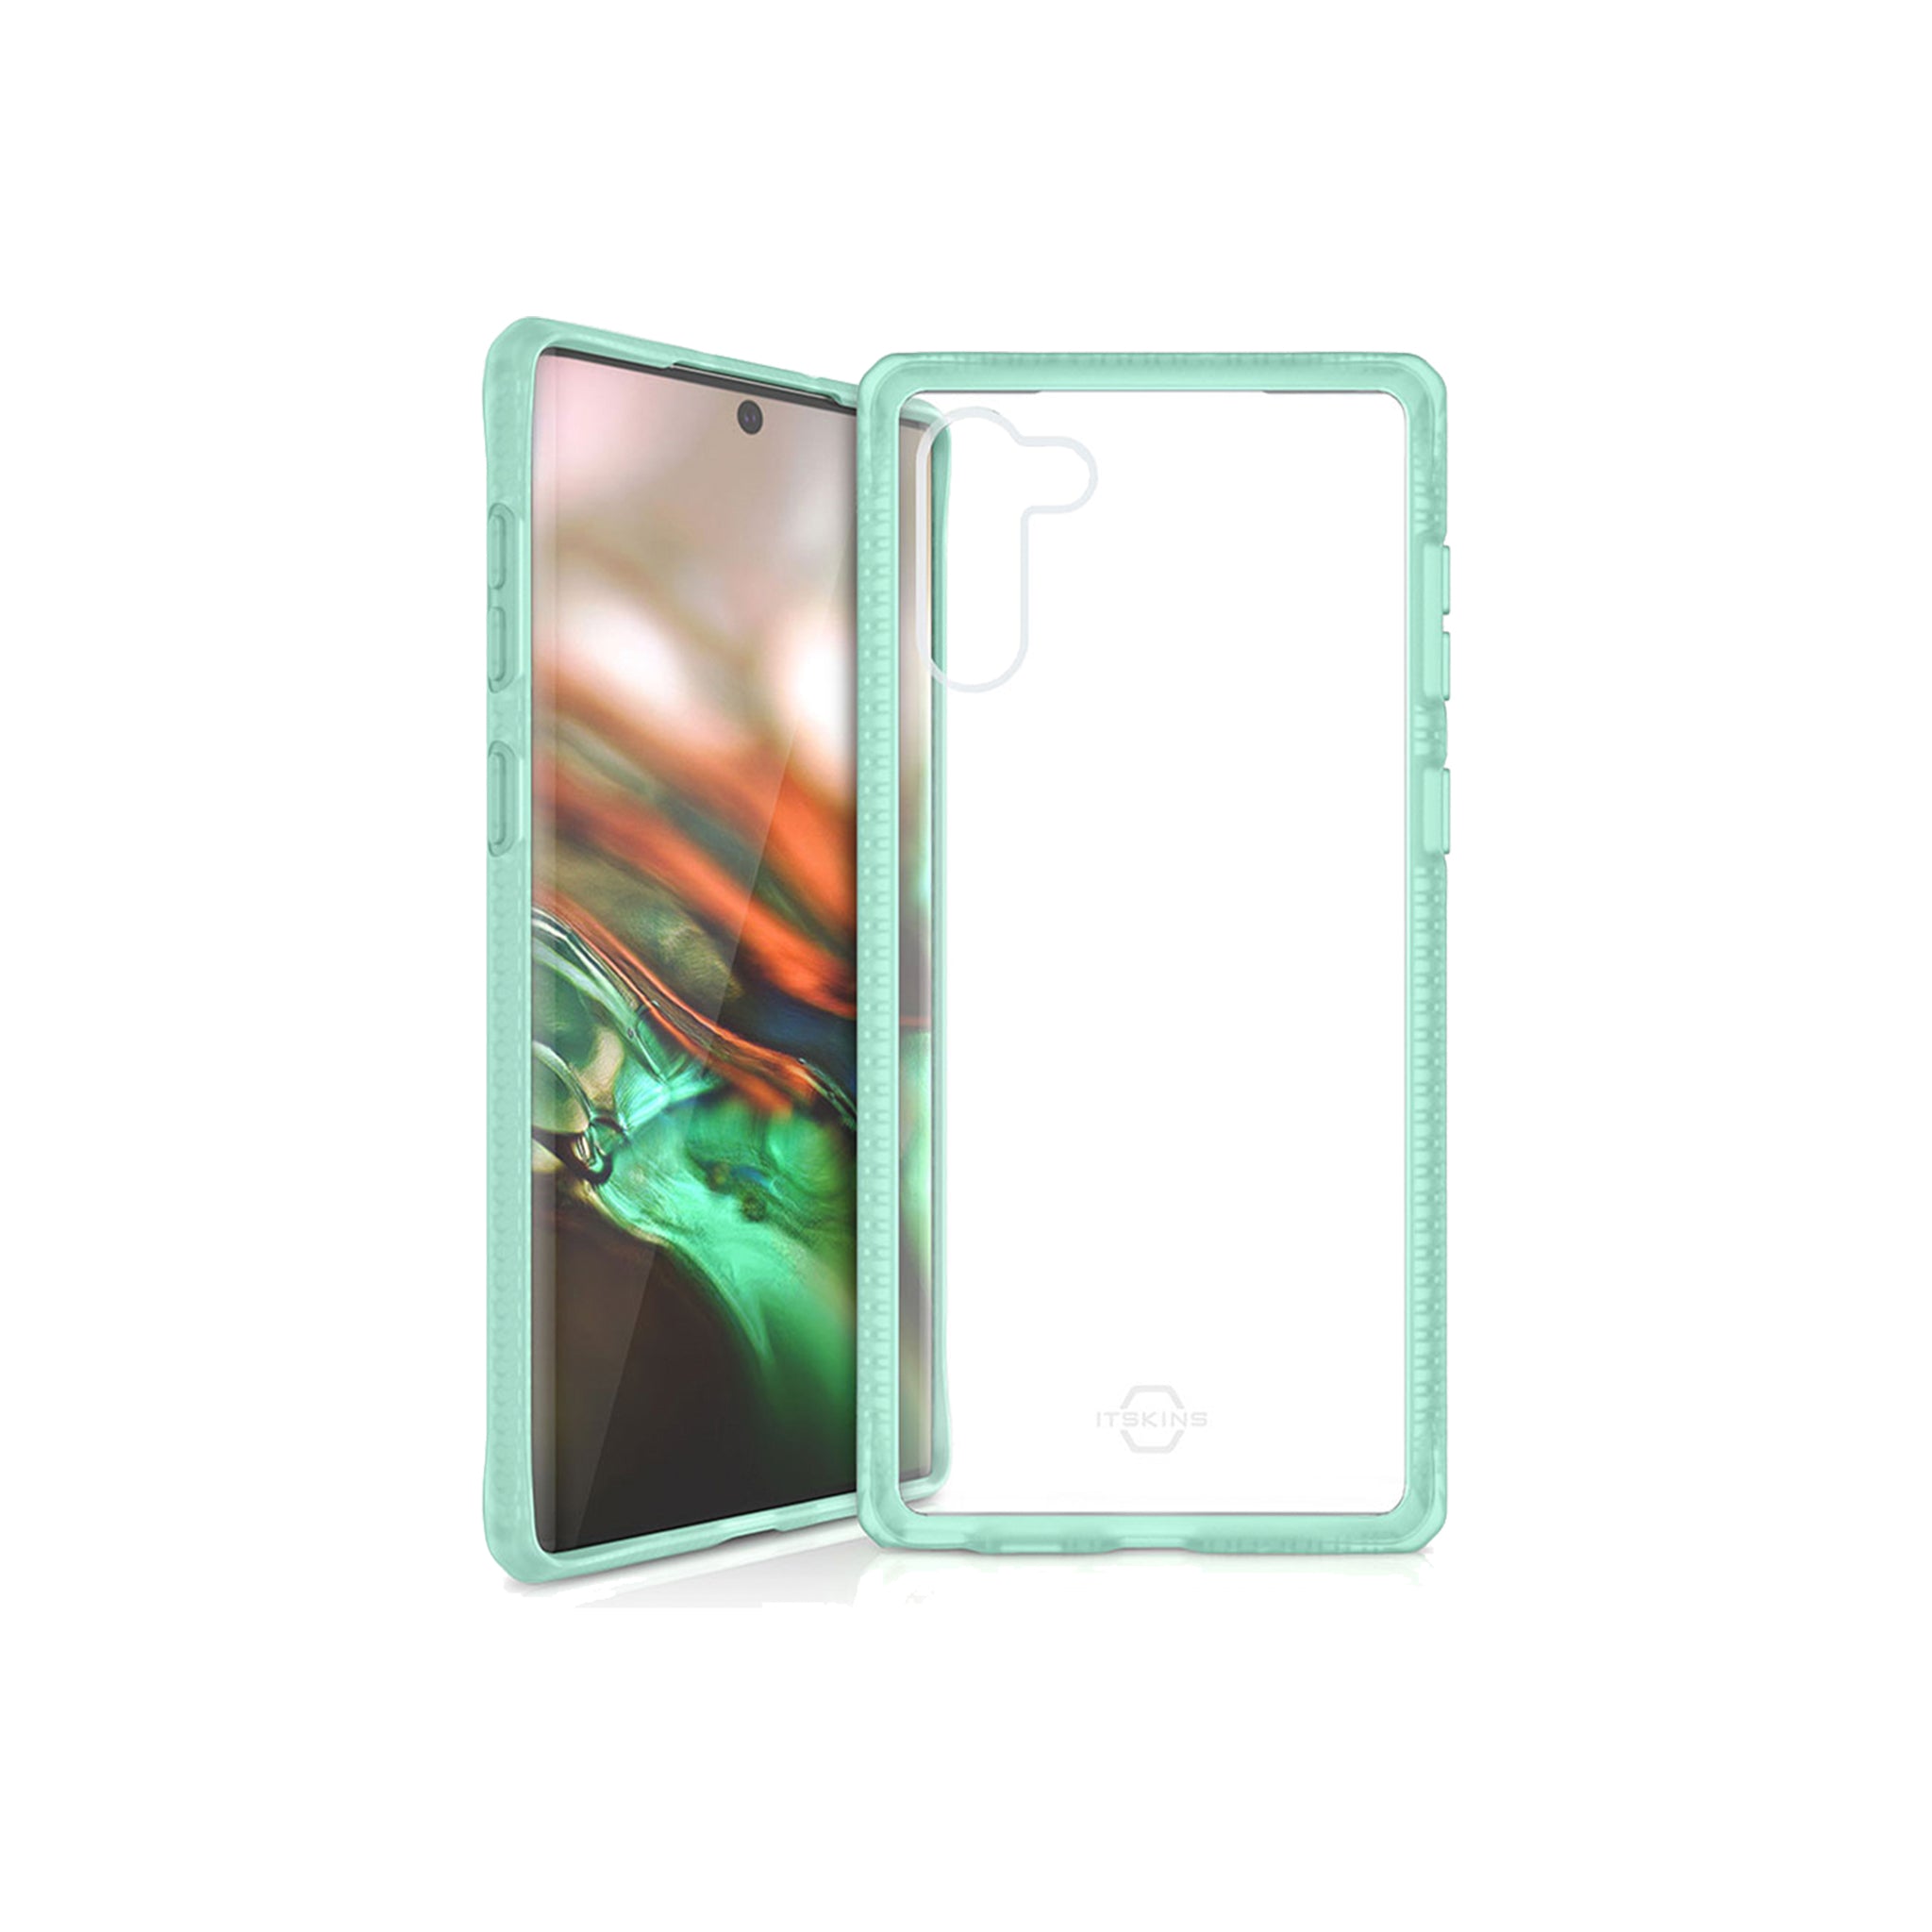 Itskins - Hybrid Frost Mkii Case For Samsung Galaxy Note 10 - Tiffany Green And Transparent